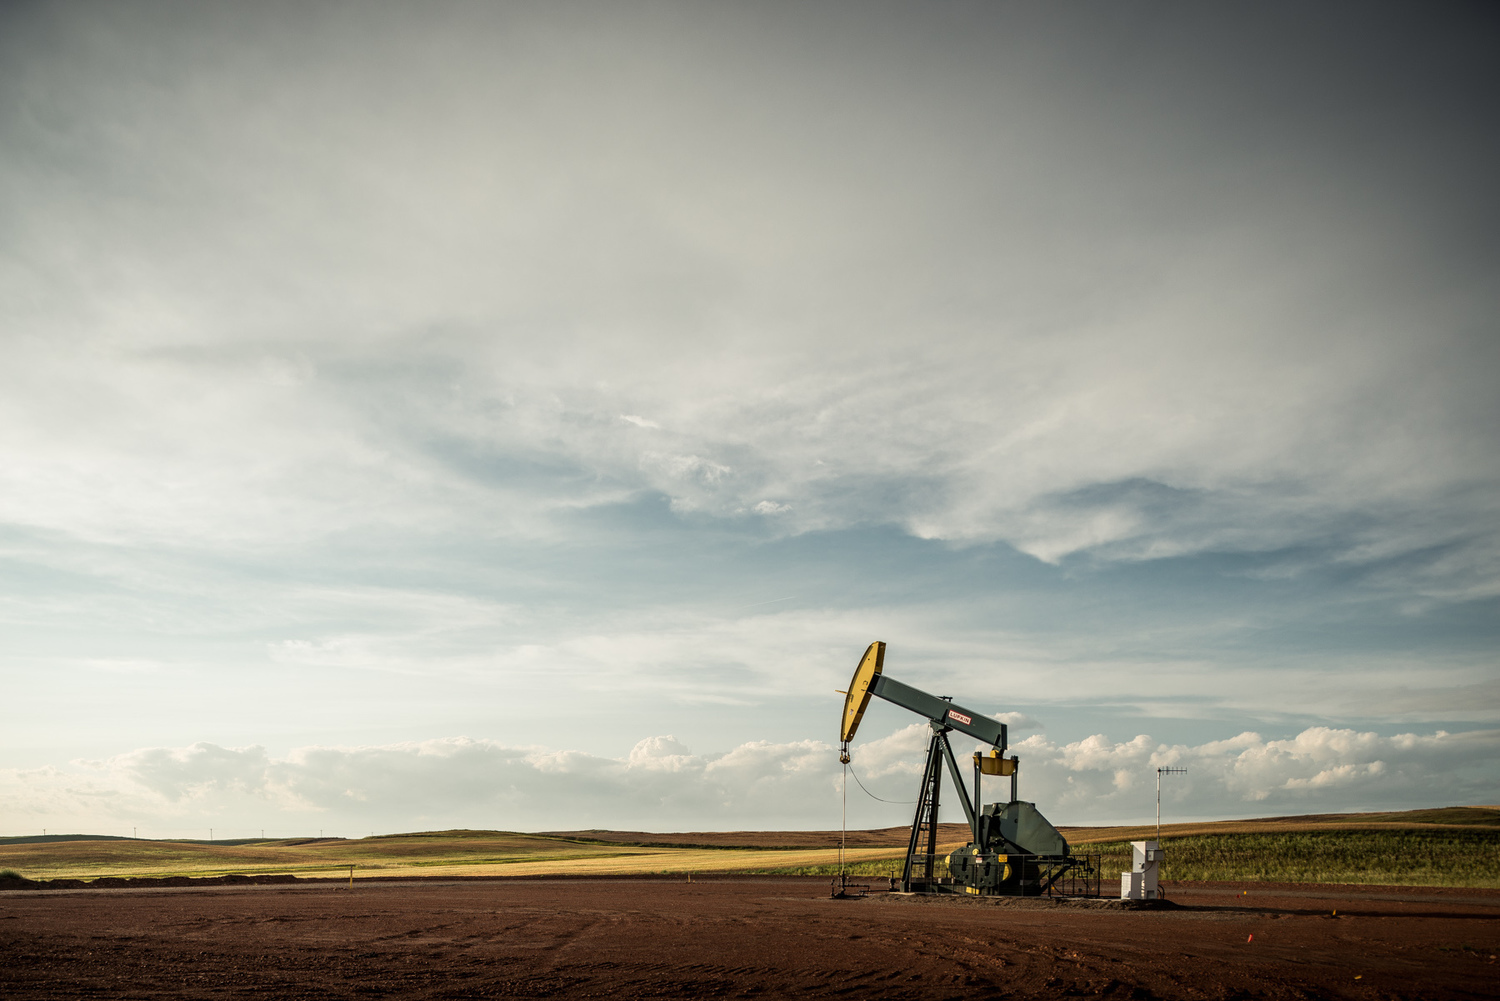  A Hess oil pump jack overlooks the North Dakota oil fields known as the Bakken in the aftermath of a thunderstorm. 